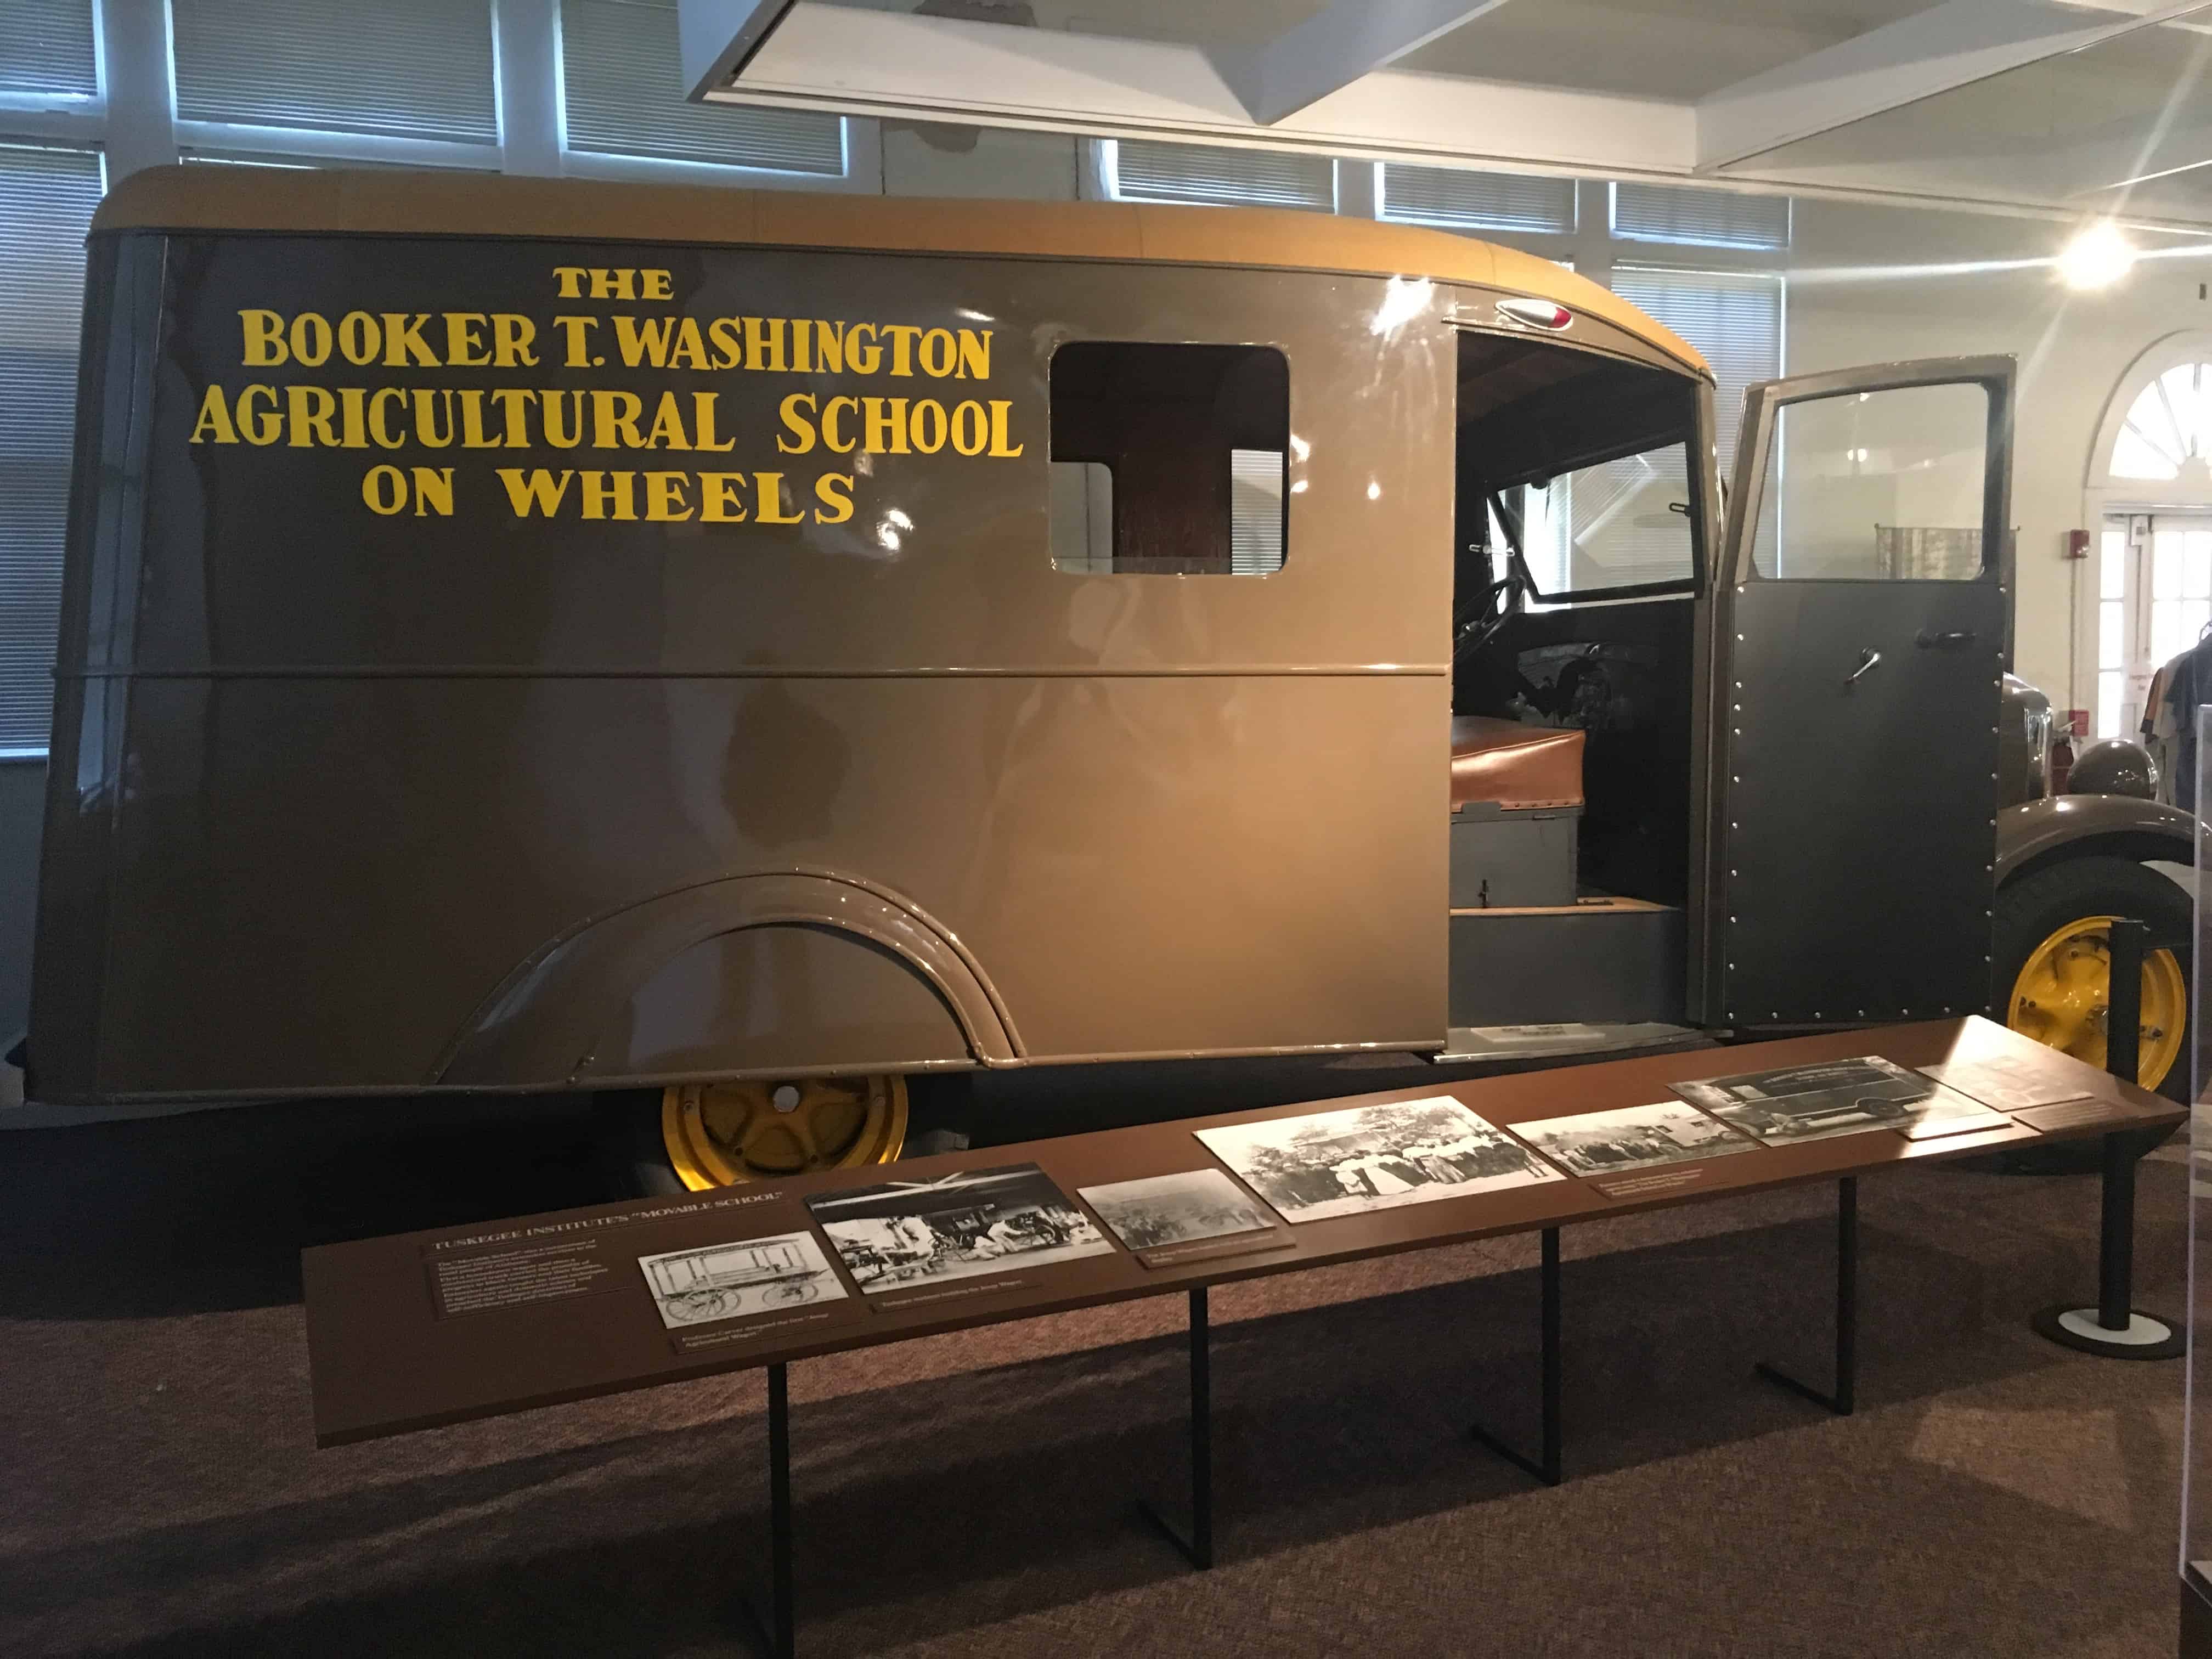 Booker T. Washington Agricultural School on Wheels at the George Washington Carver Museum